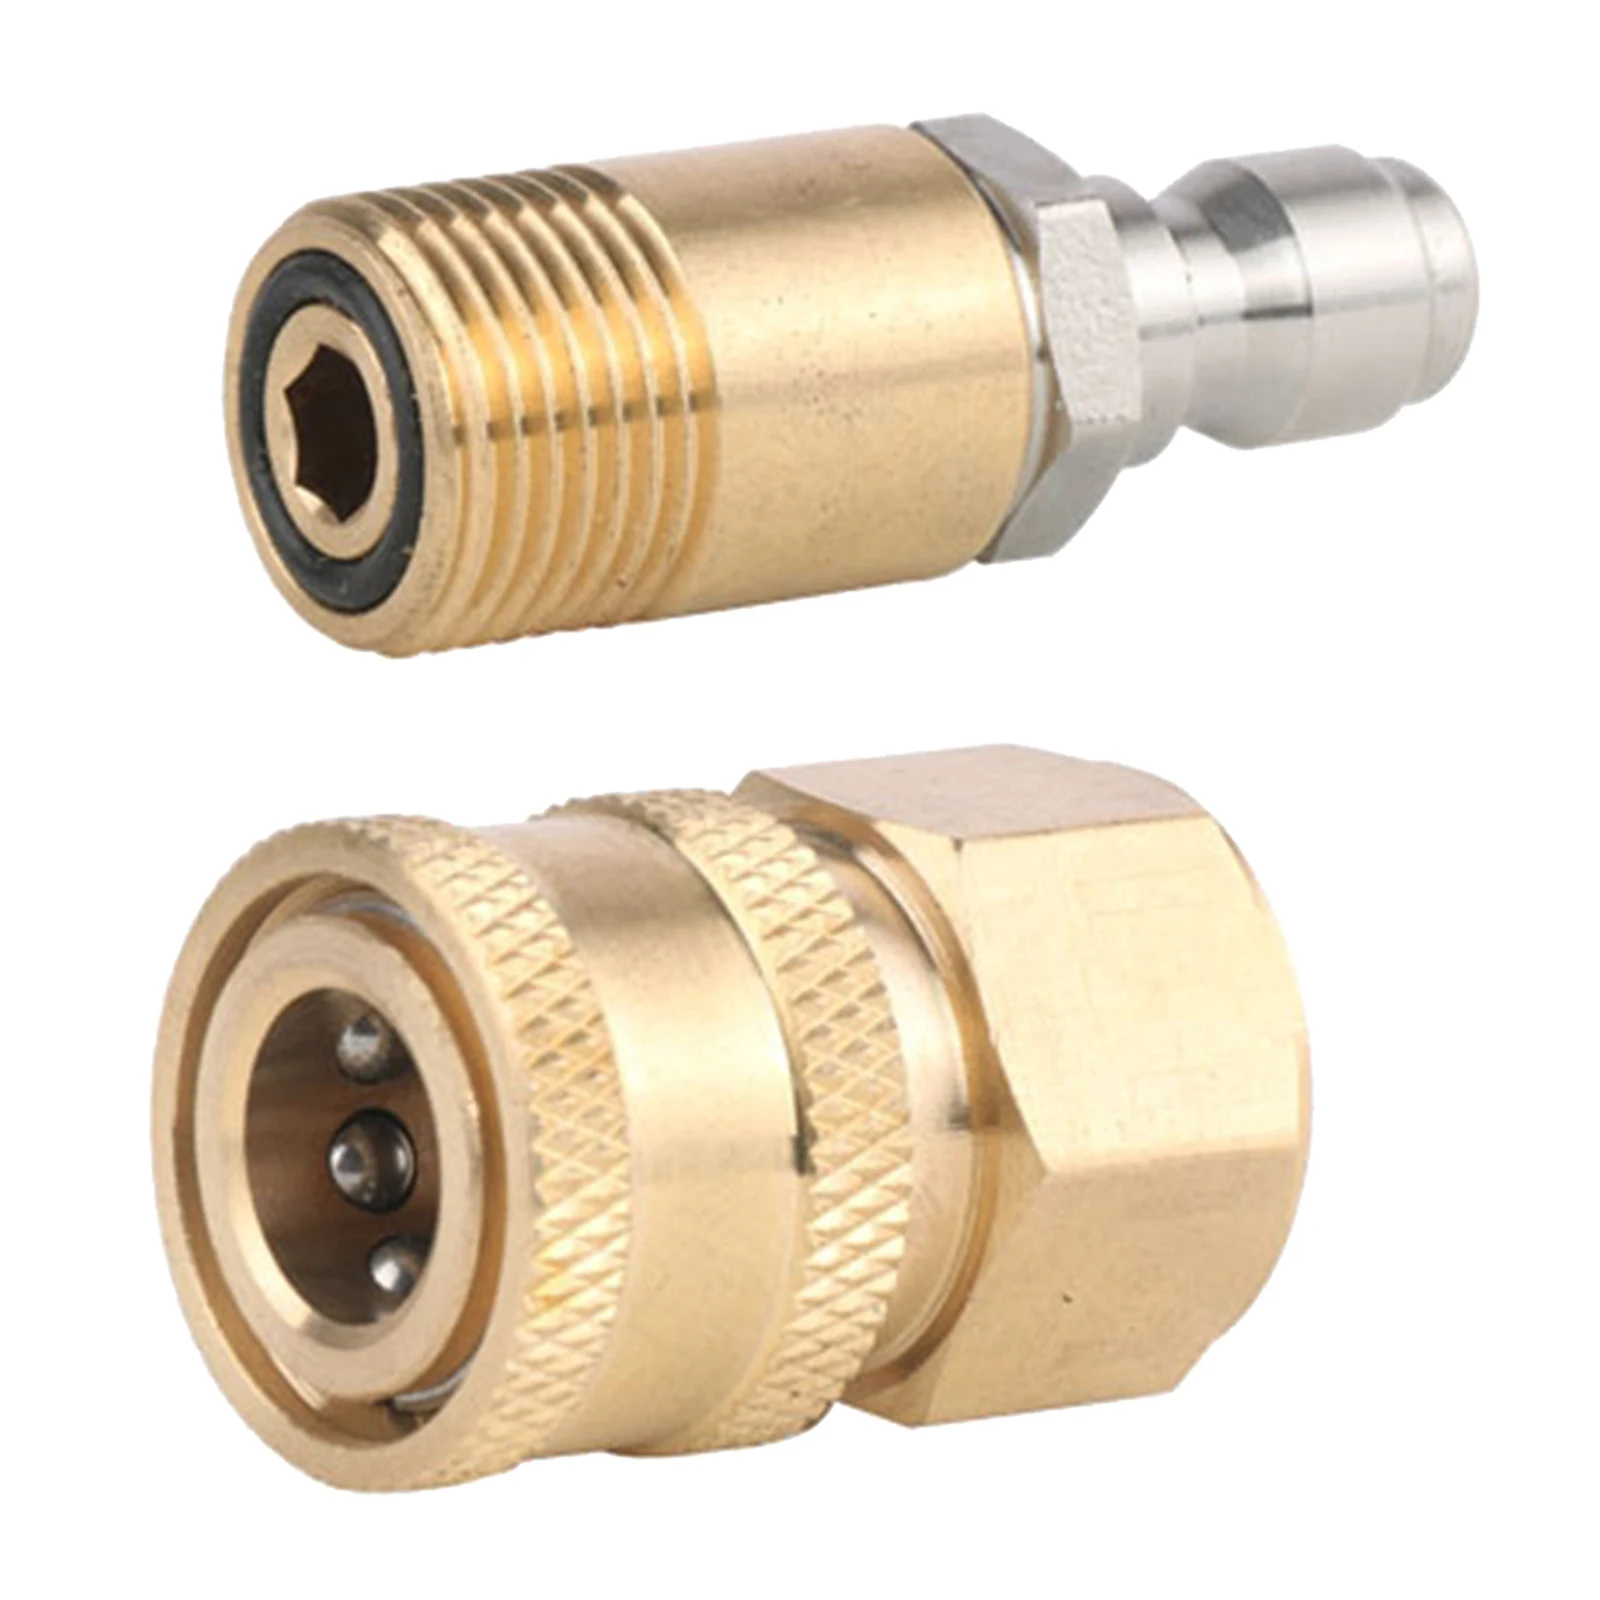 M18 Pressure Washer Adapter Set Quick Disconnect Kit Quick Connect Quick Release Water Hose Fitting 1/4" M18x1.5